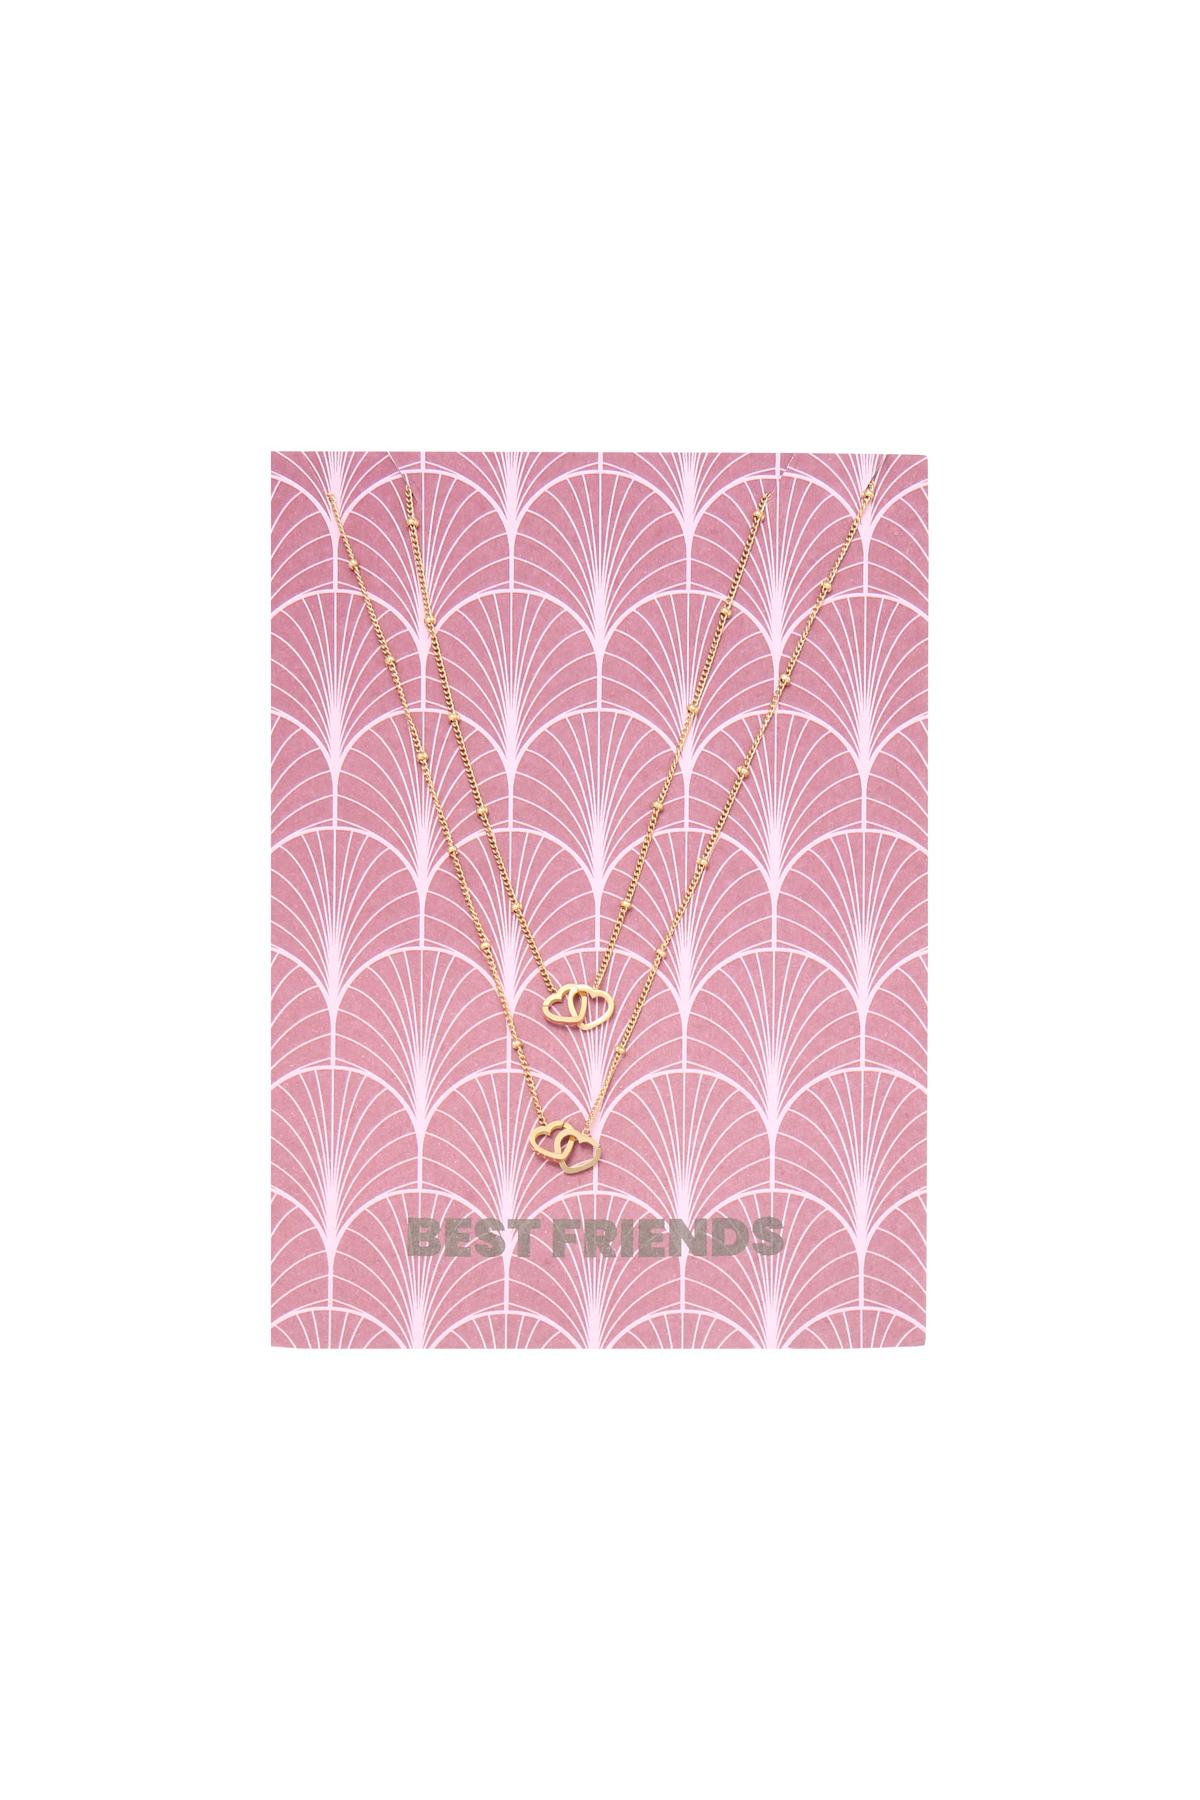 Necklace Card Best Friends Gold Stainless Steel h5 